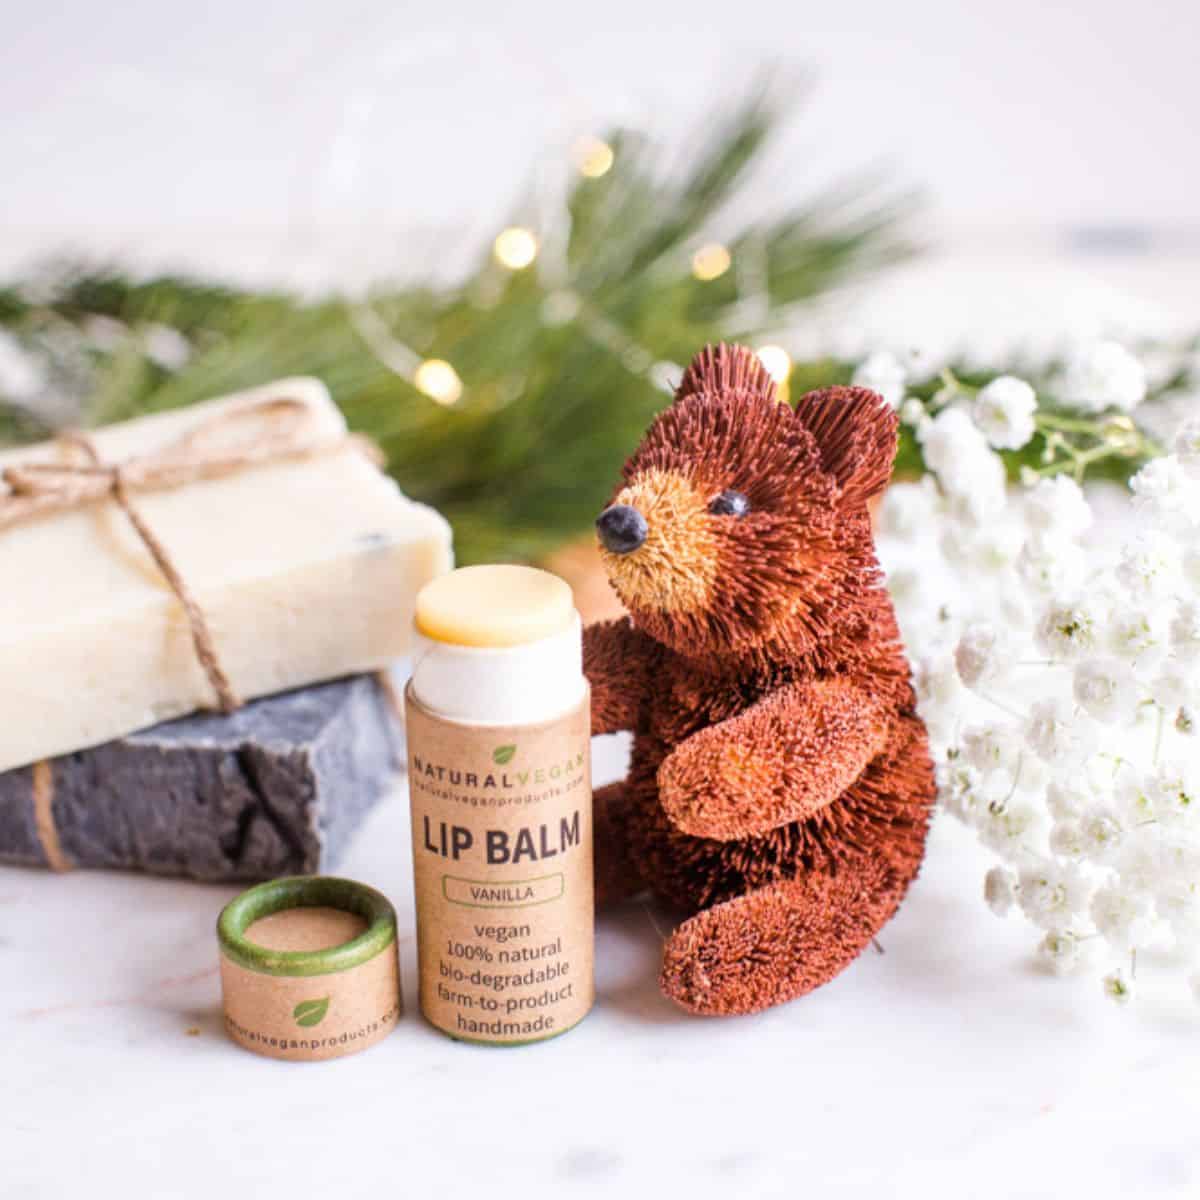 Eco friendly vegan gifts decorated for the holidays